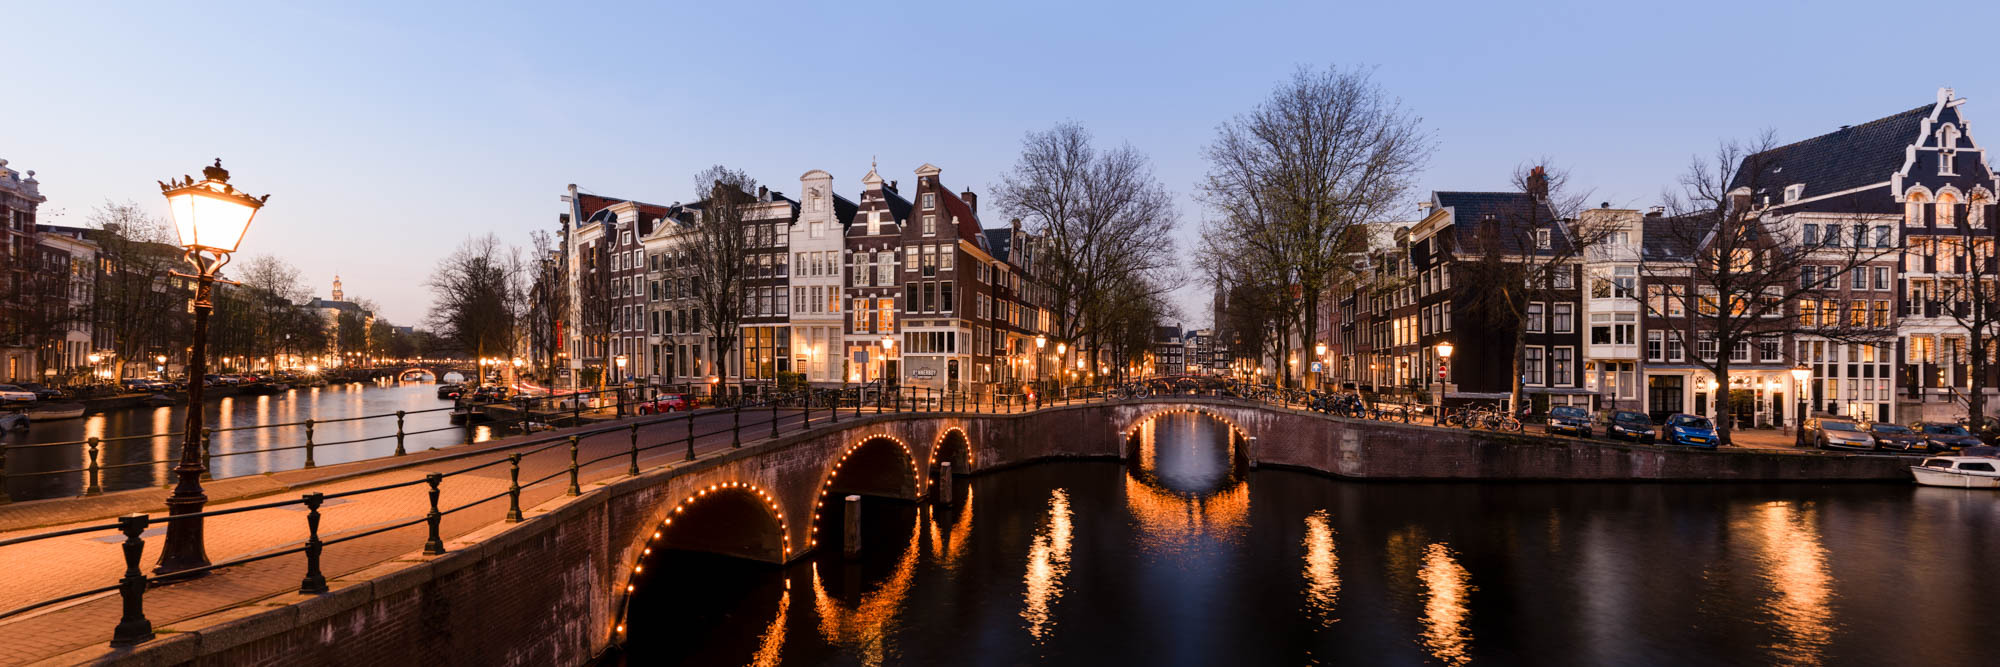 Panorama of the canals and bridges of Amsterdam in The Netherlands at night